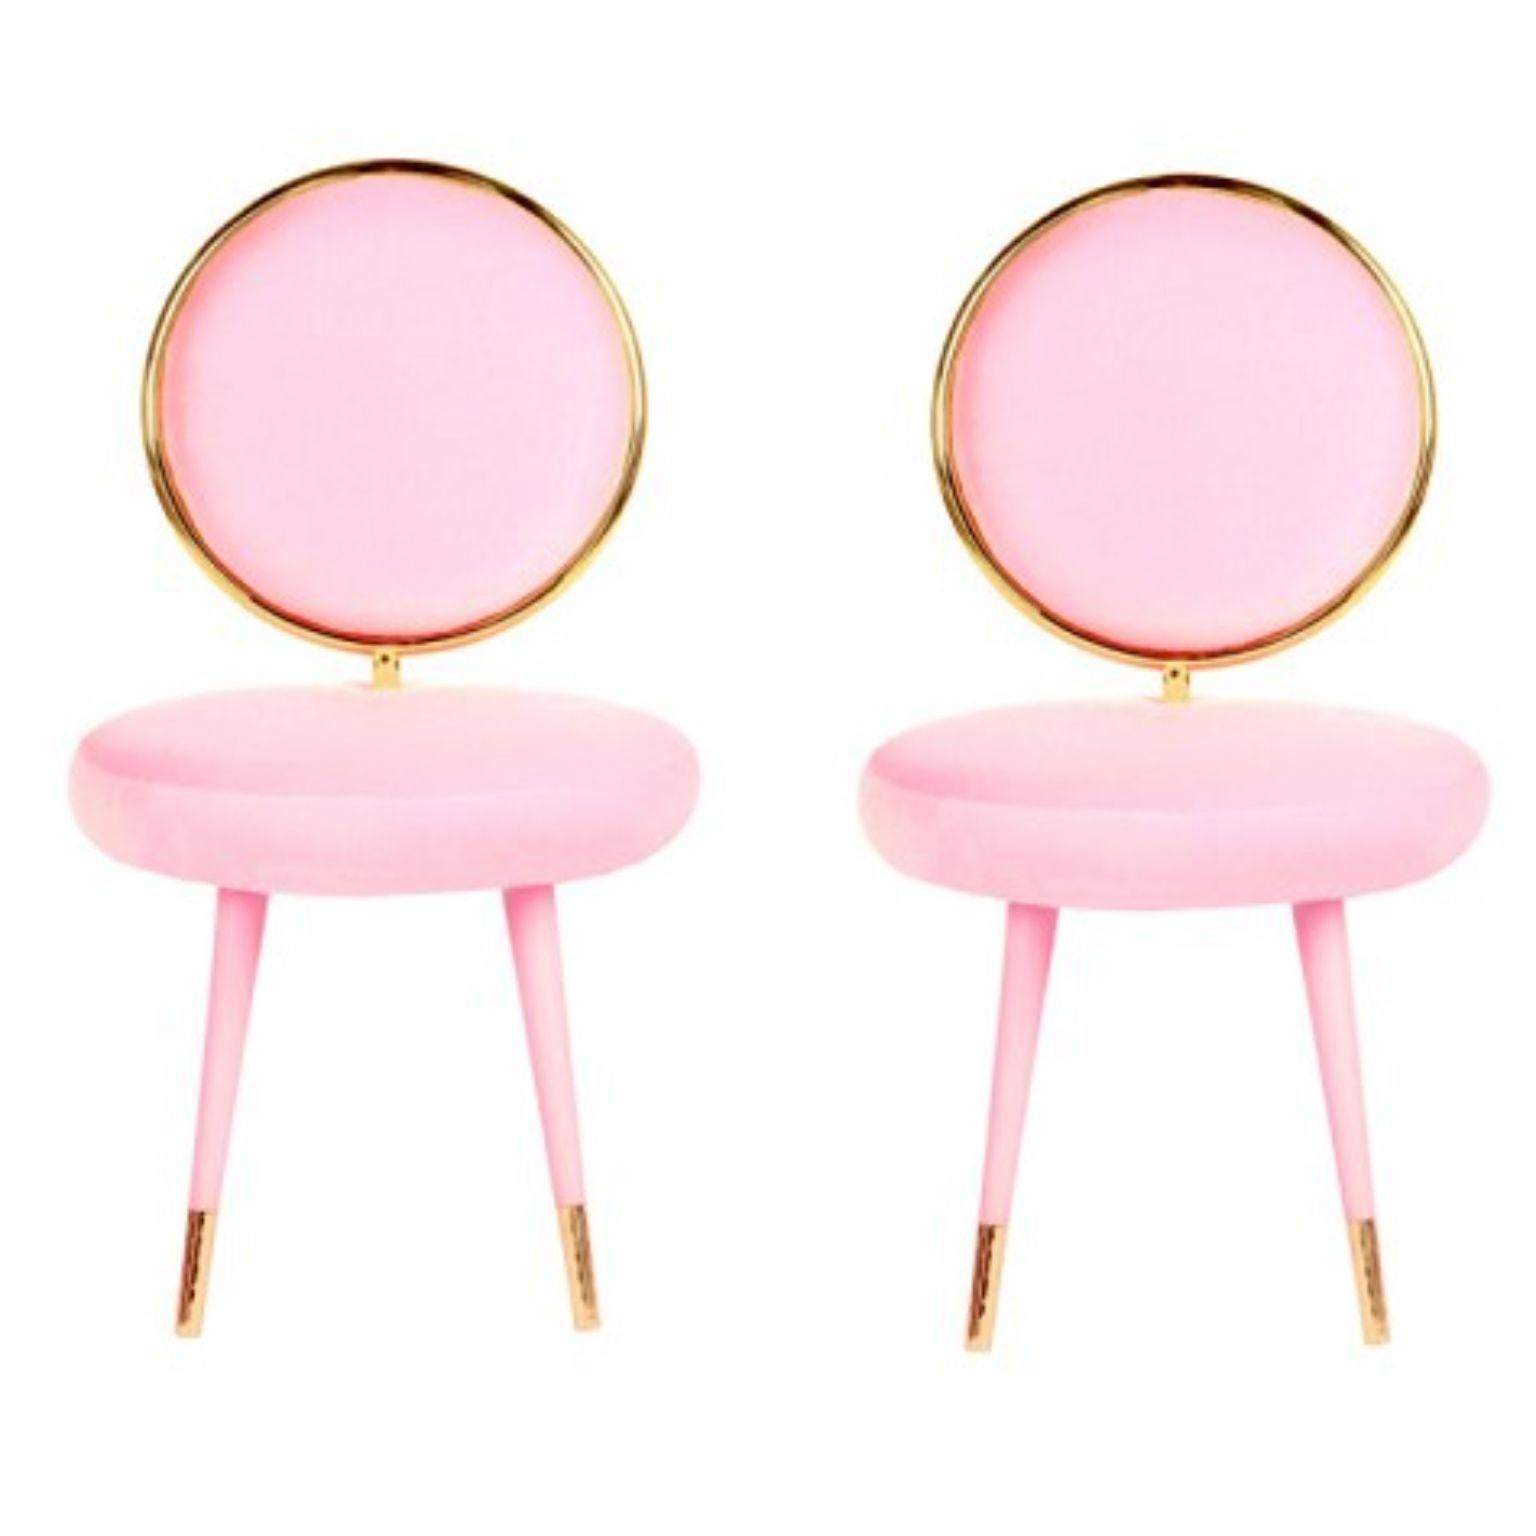 Set of 2 Graceful dining chairs, Royal Stranger
Dimensions: 95 x 54 x 54 cm
Materials: Blossom pink velvet upholstery with stainless steel coated in brass frame elevated by lacquered wood legs and brass feet covers.

Available in: Mint green,